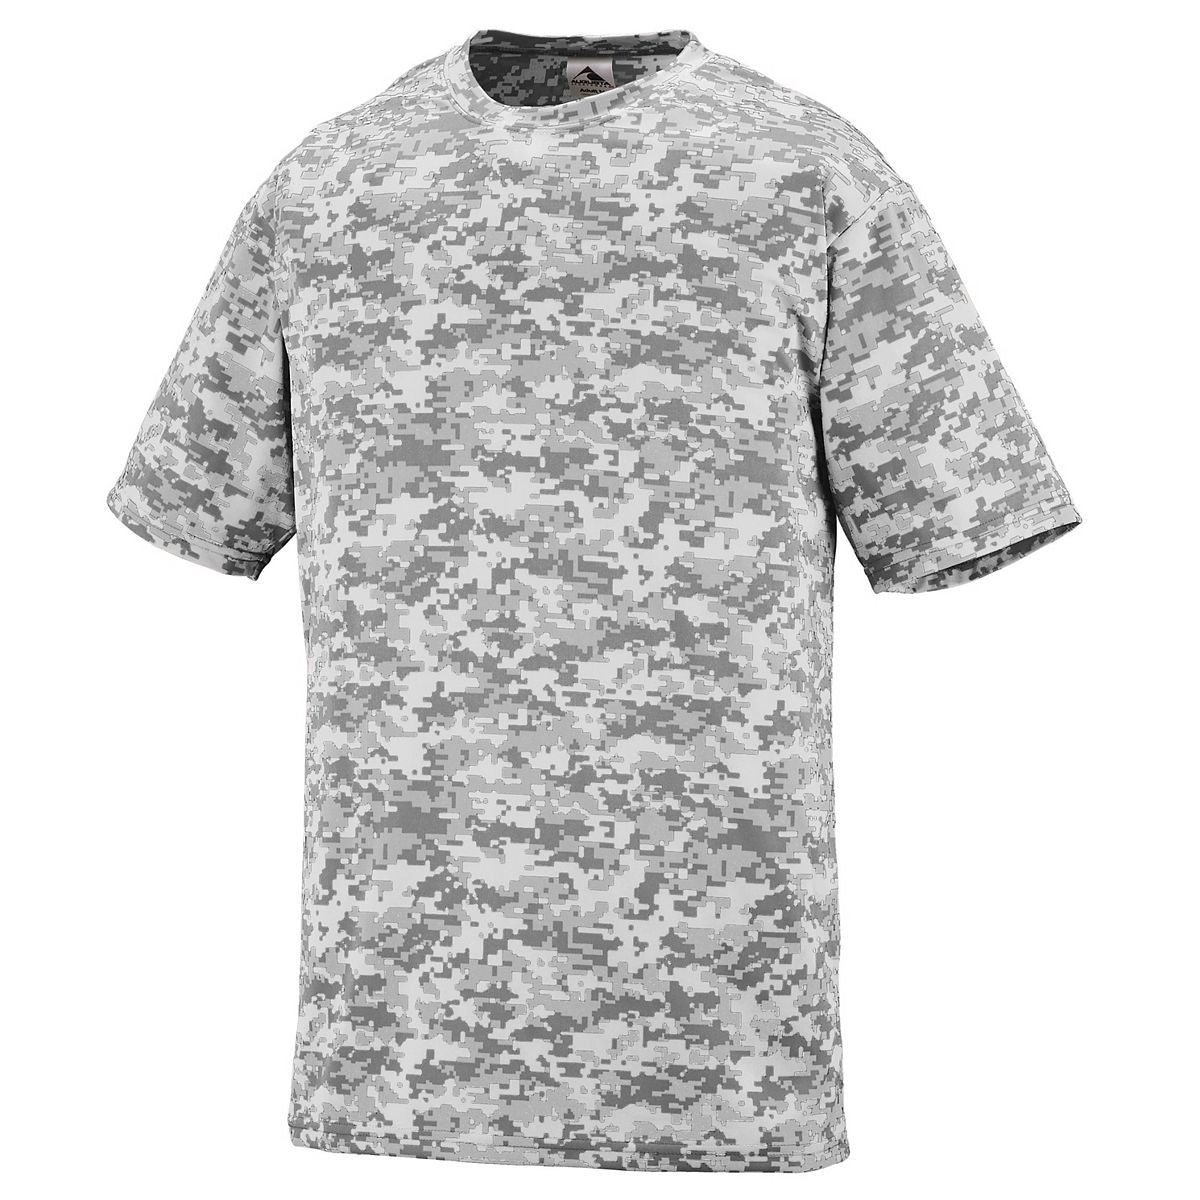 Augusta Sportswear Youth Digi Camo Wicking T-Shirt in White Digi  -Part of the Youth, Youth-Tee-Shirt, T-Shirts, Augusta-Products, Shirts product lines at KanaleyCreations.com